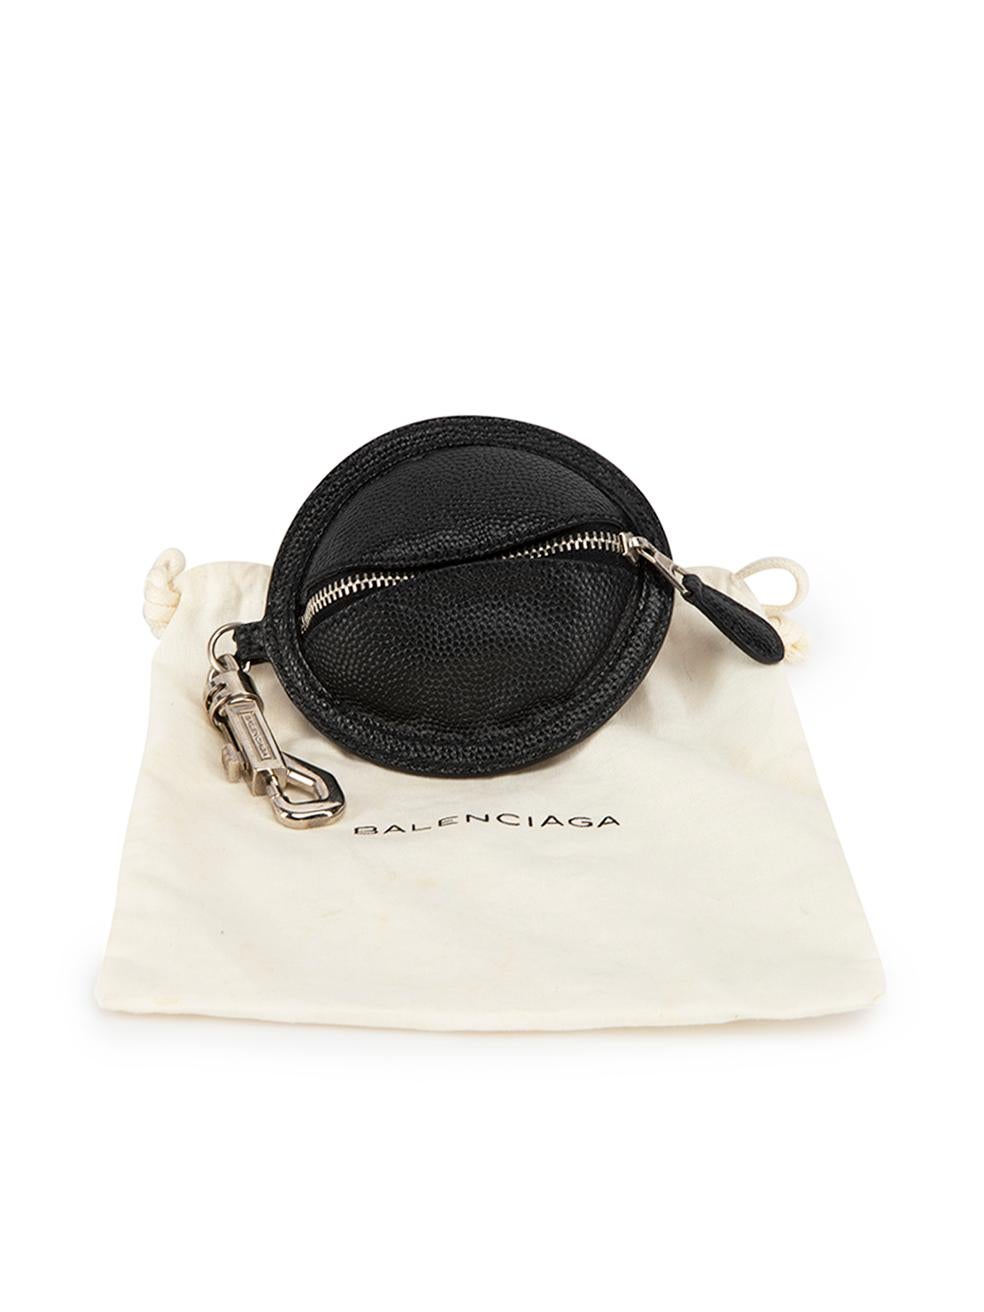 Balenciaga Women's Black Leather Caviar Embossed Keychain Pouch 4